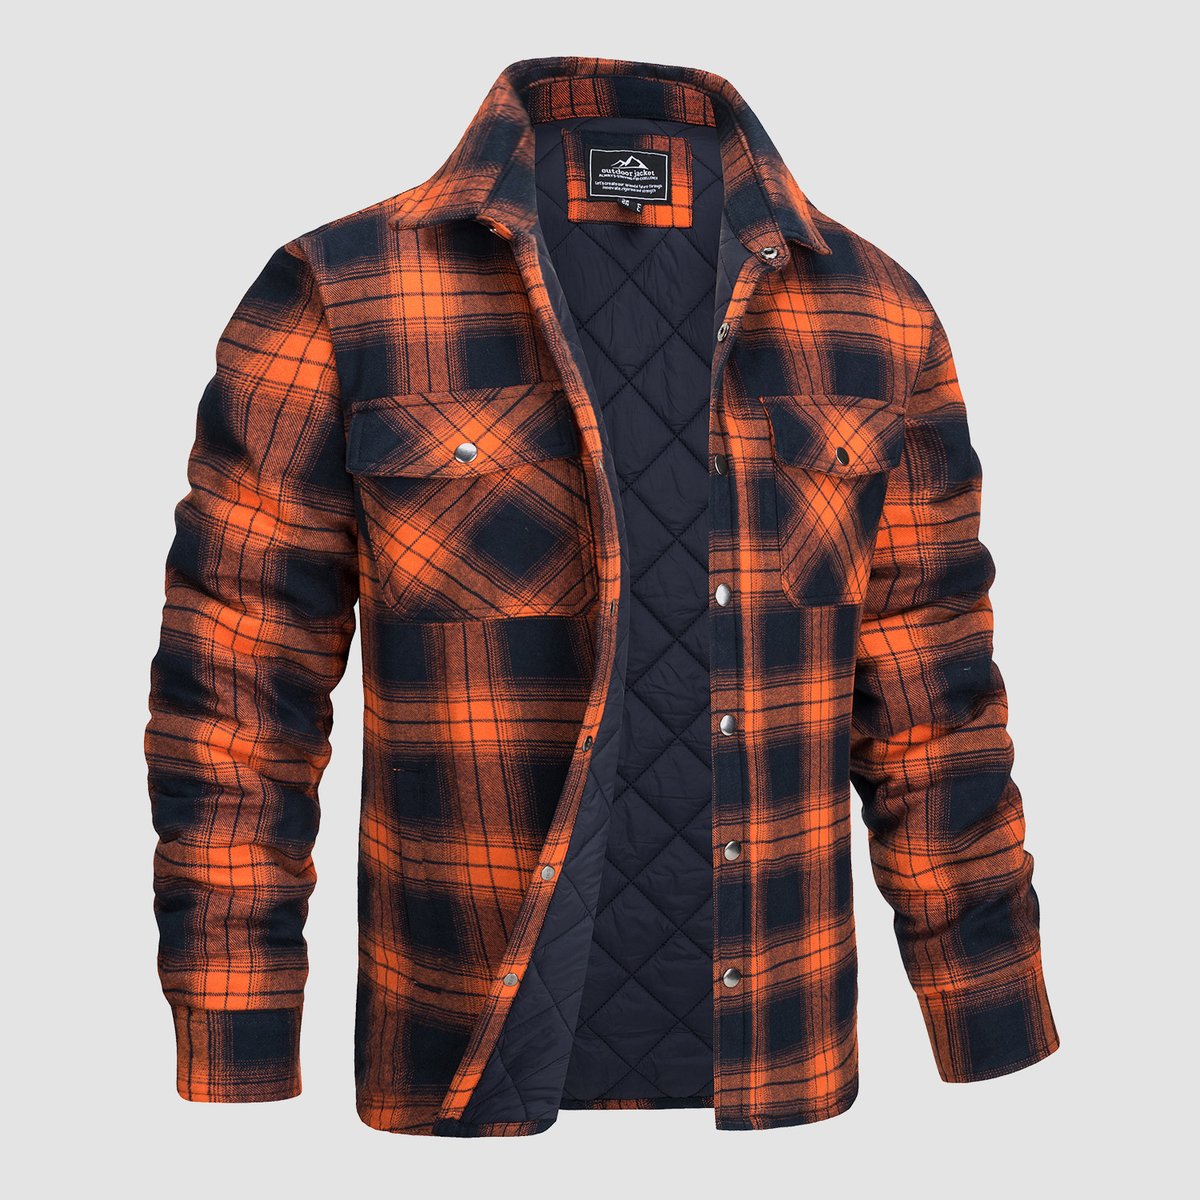 Men's Classic Flannel Shirt Jacket 😮 Get one for your basic look. #menshirt #menjacket #flannel #magcomsen #basiclook